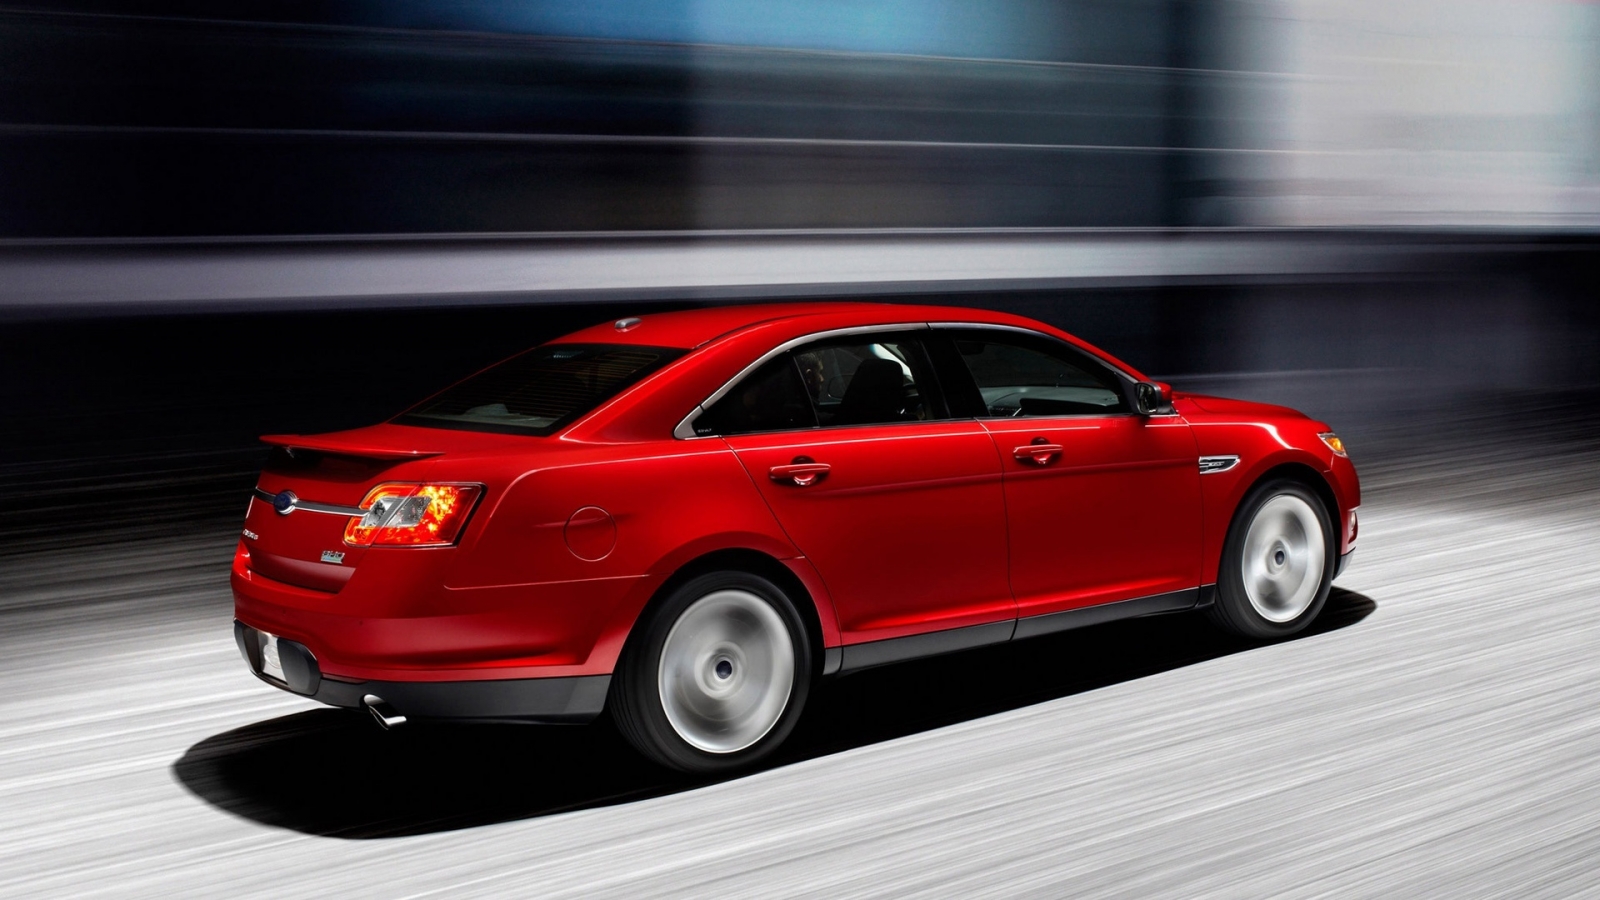 Ford Taurus SHO 2010 for 1600 x 900 HDTV resolution